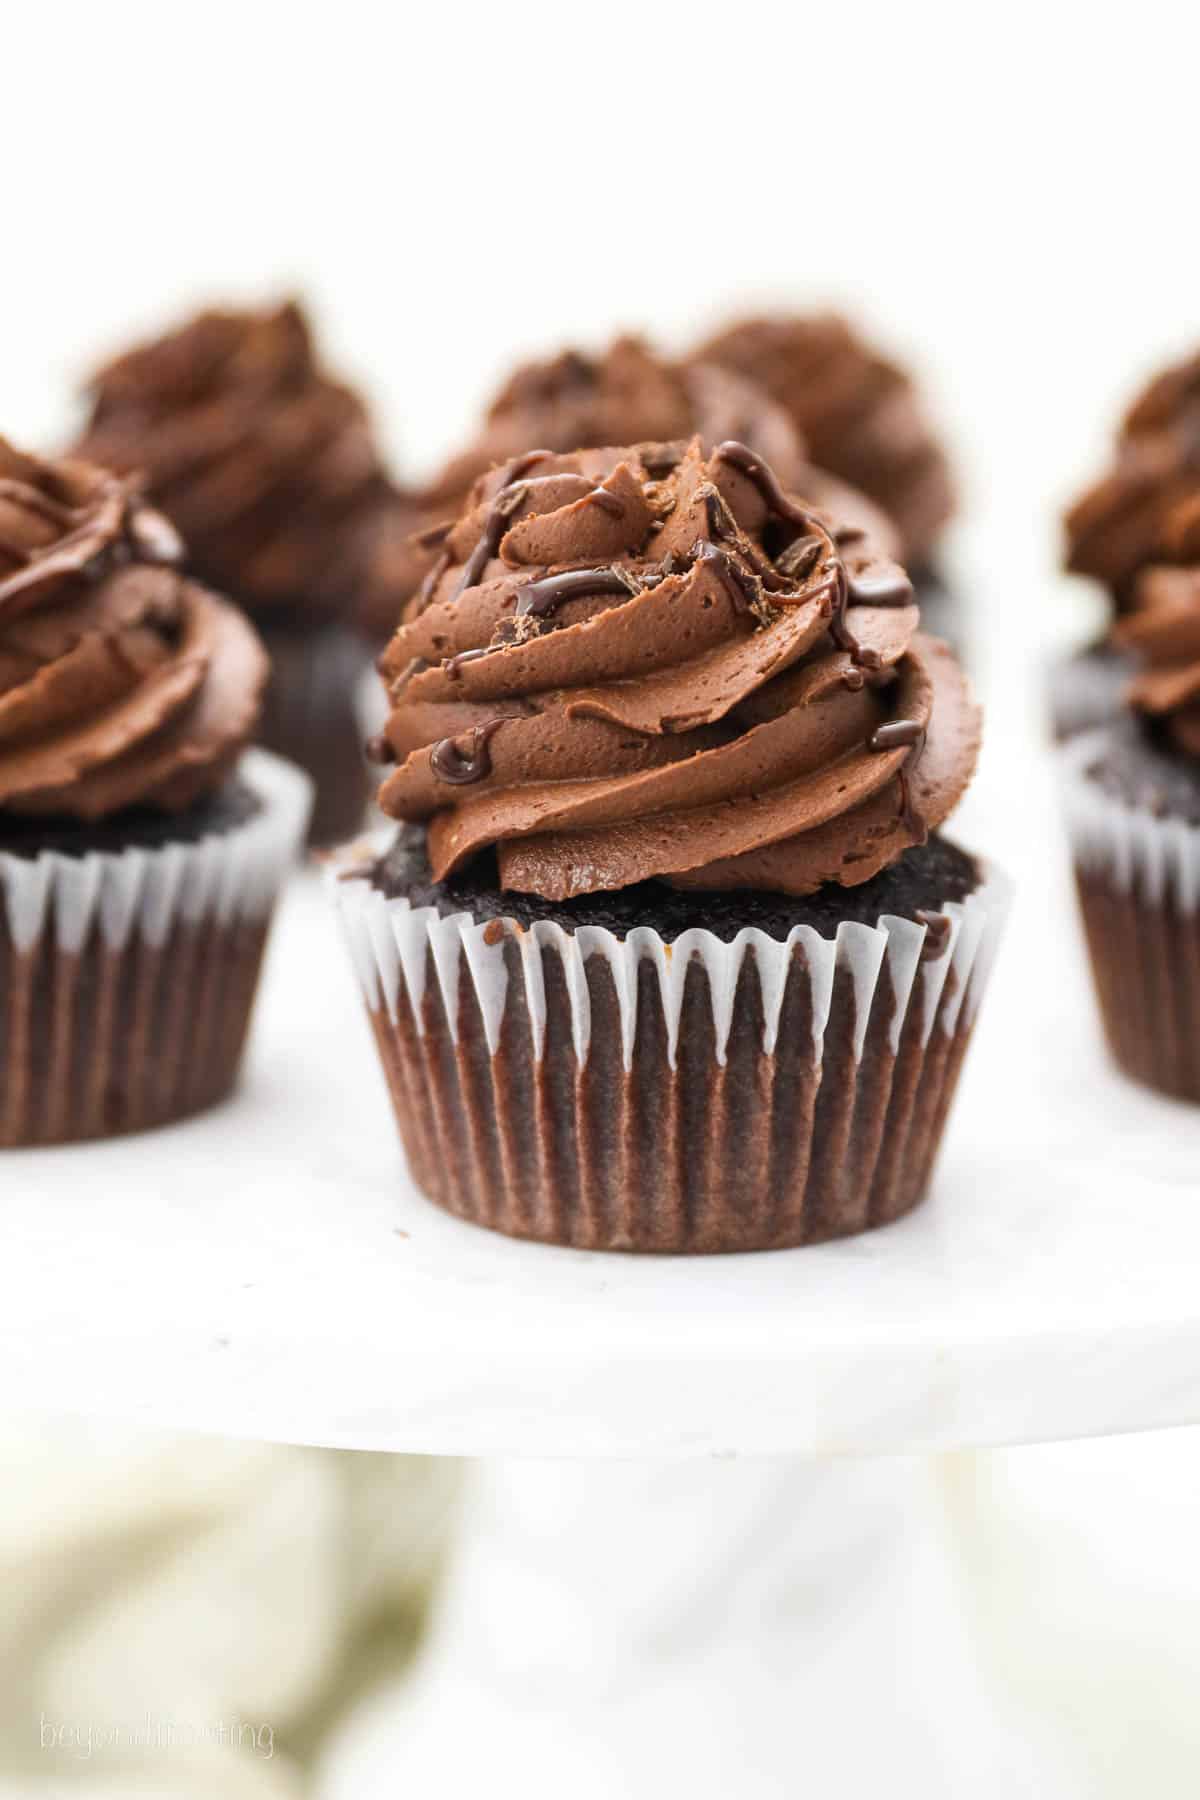 Frosted chocolate ganache cupcakes on a white countertop.